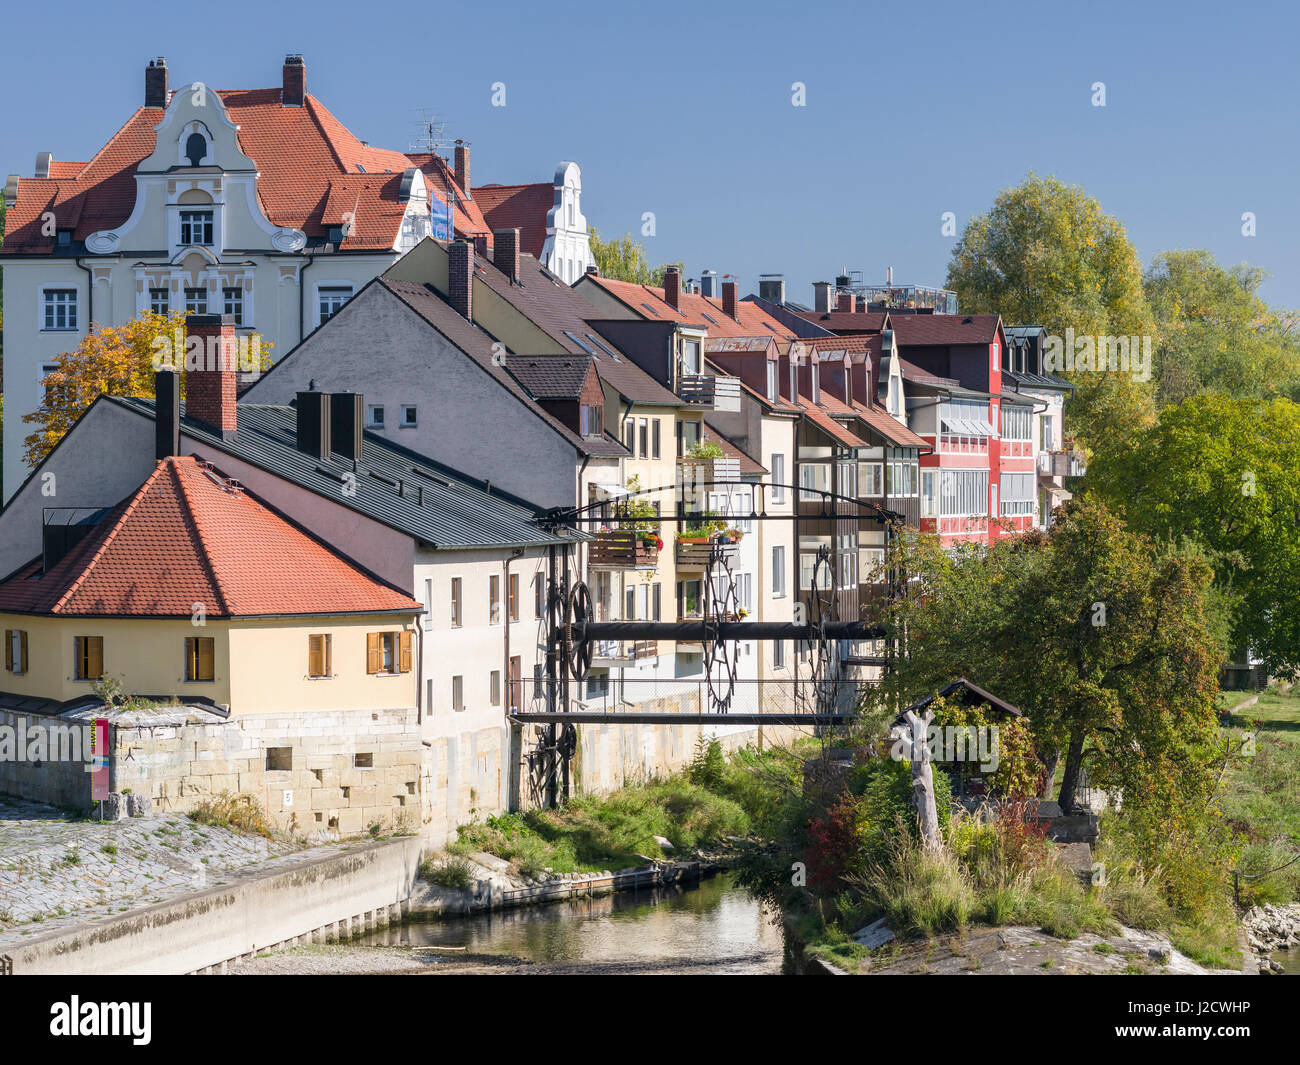 Regensburg in Bavaria, the Old Town is listed as UNESCO World Heritage. The Jahninsel, an island in the Danube. Germany (Large format sizes available) Stock Photo